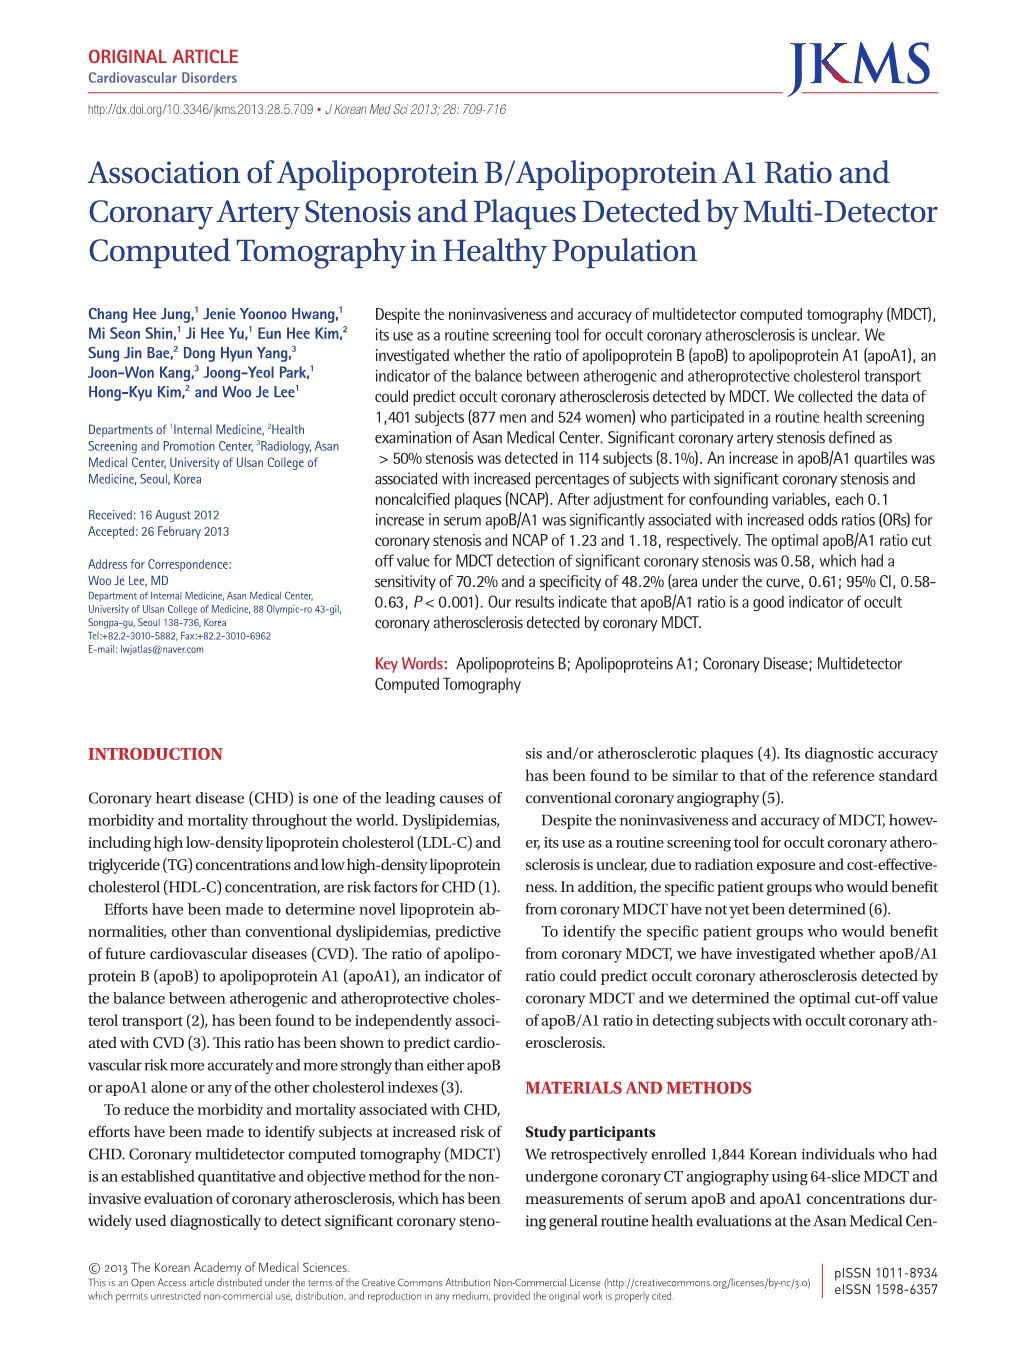 Association of Apolipoprotein B/Apolipoprotein A1 Ratio and Coronary Artery Stenosis and Plaques Detected by Multi-Detector Computed Tomography in Healthy Population